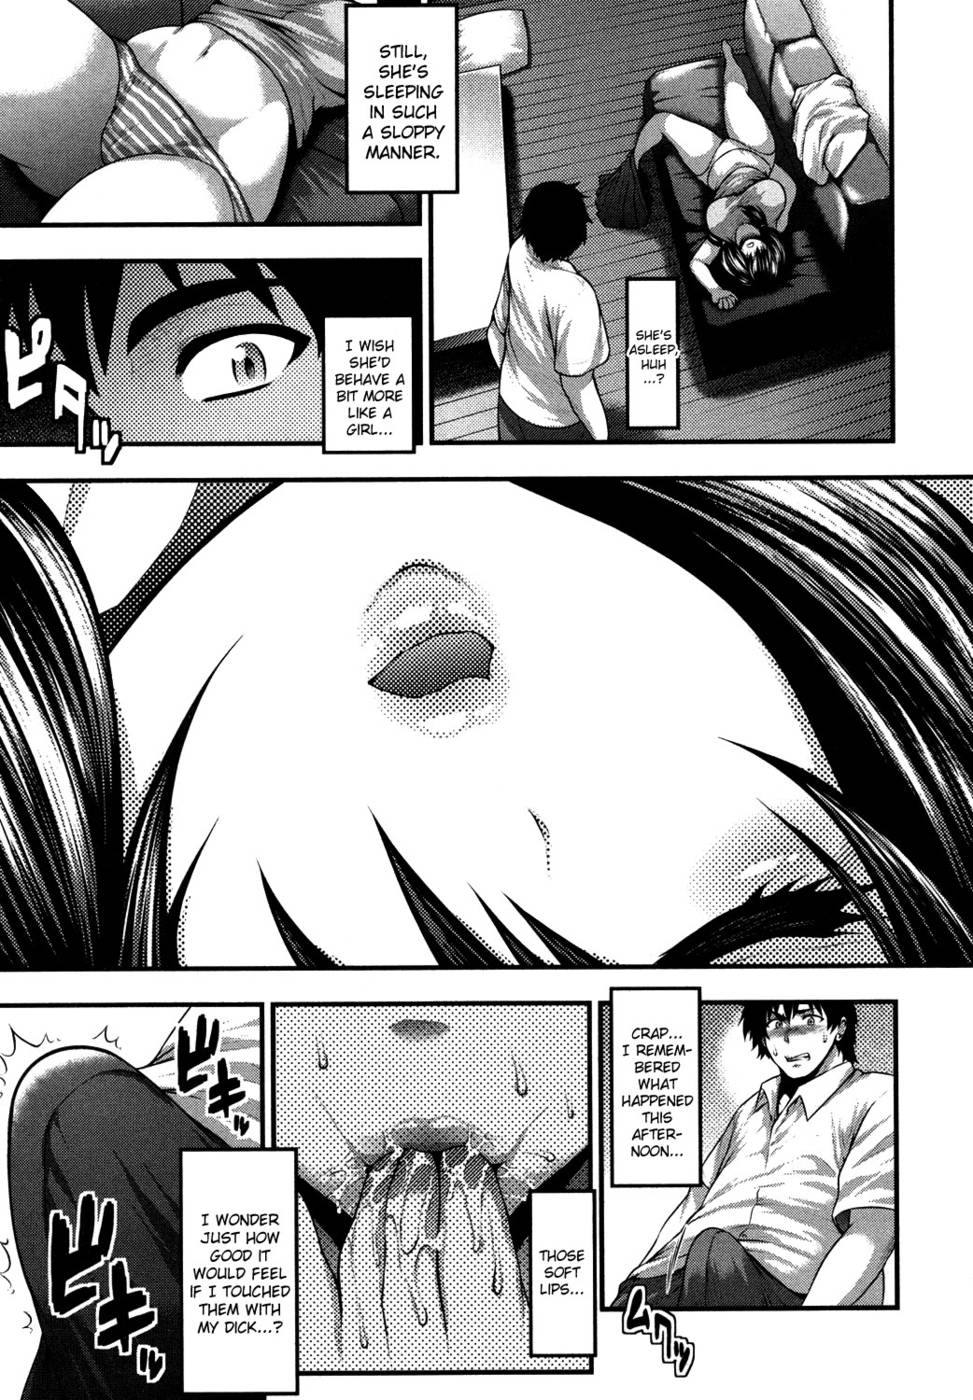 Oh! Sister & Pai-Fella Sister-Read-Hentai Manga Hentai Comic - Page: 11 -  Online porn video at mobile